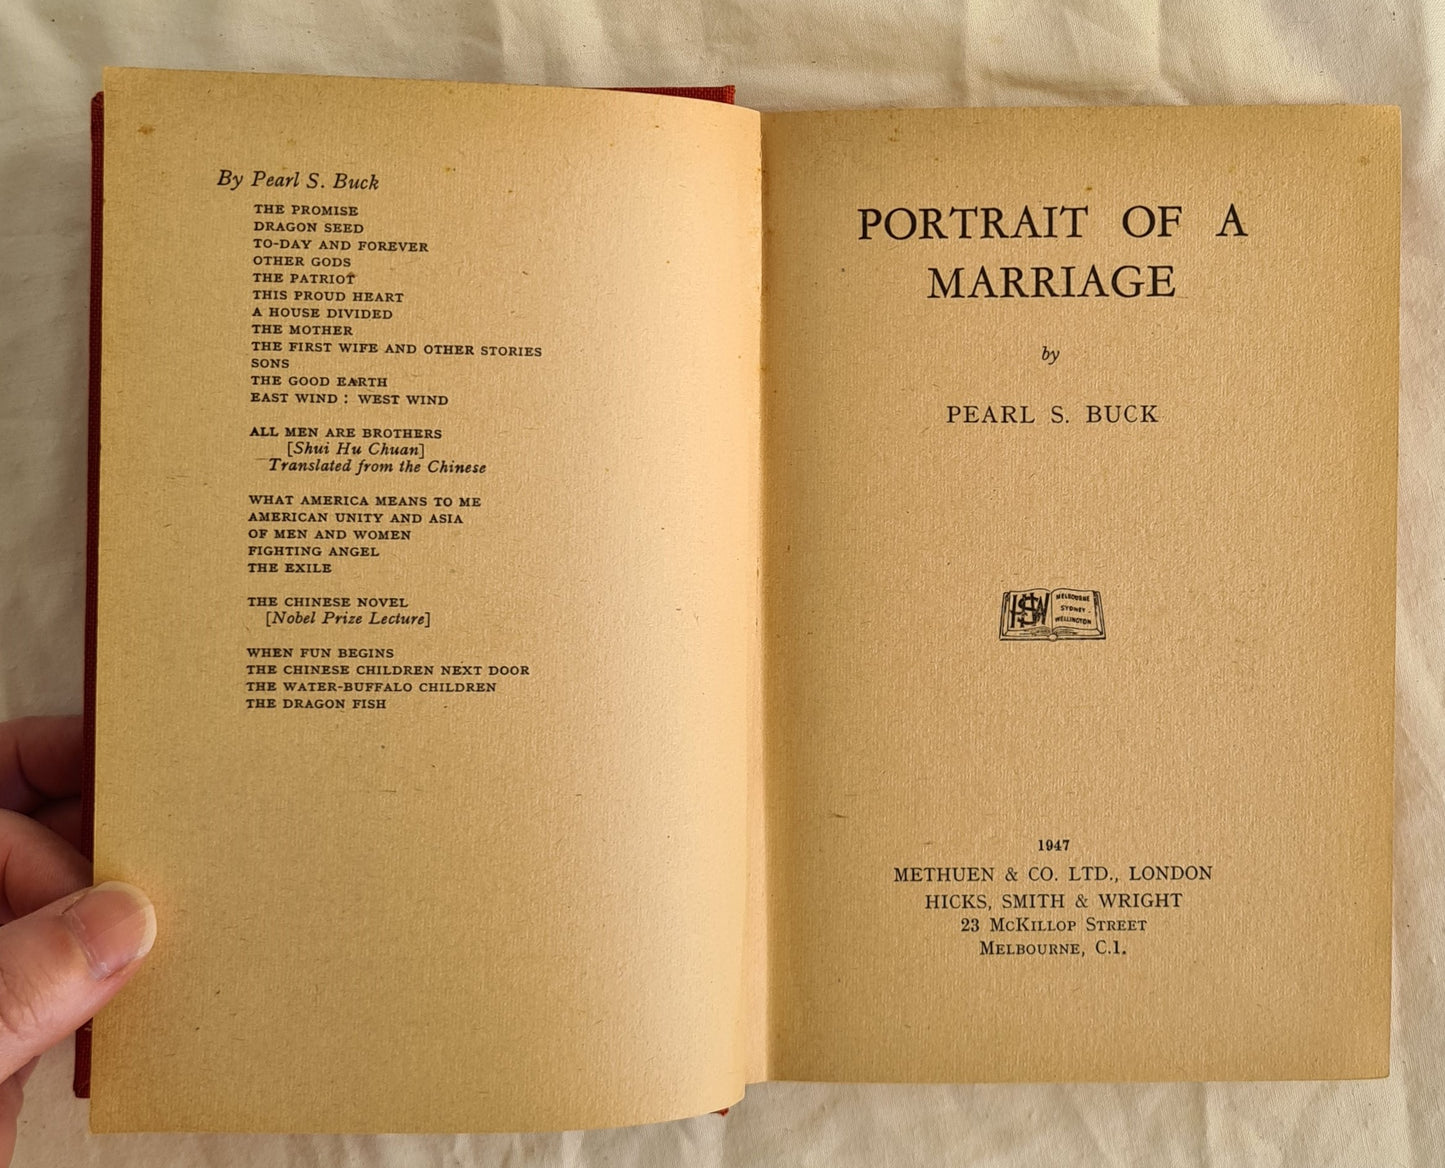 Portrait of a Marriage by Pearl S. Buck (1947)